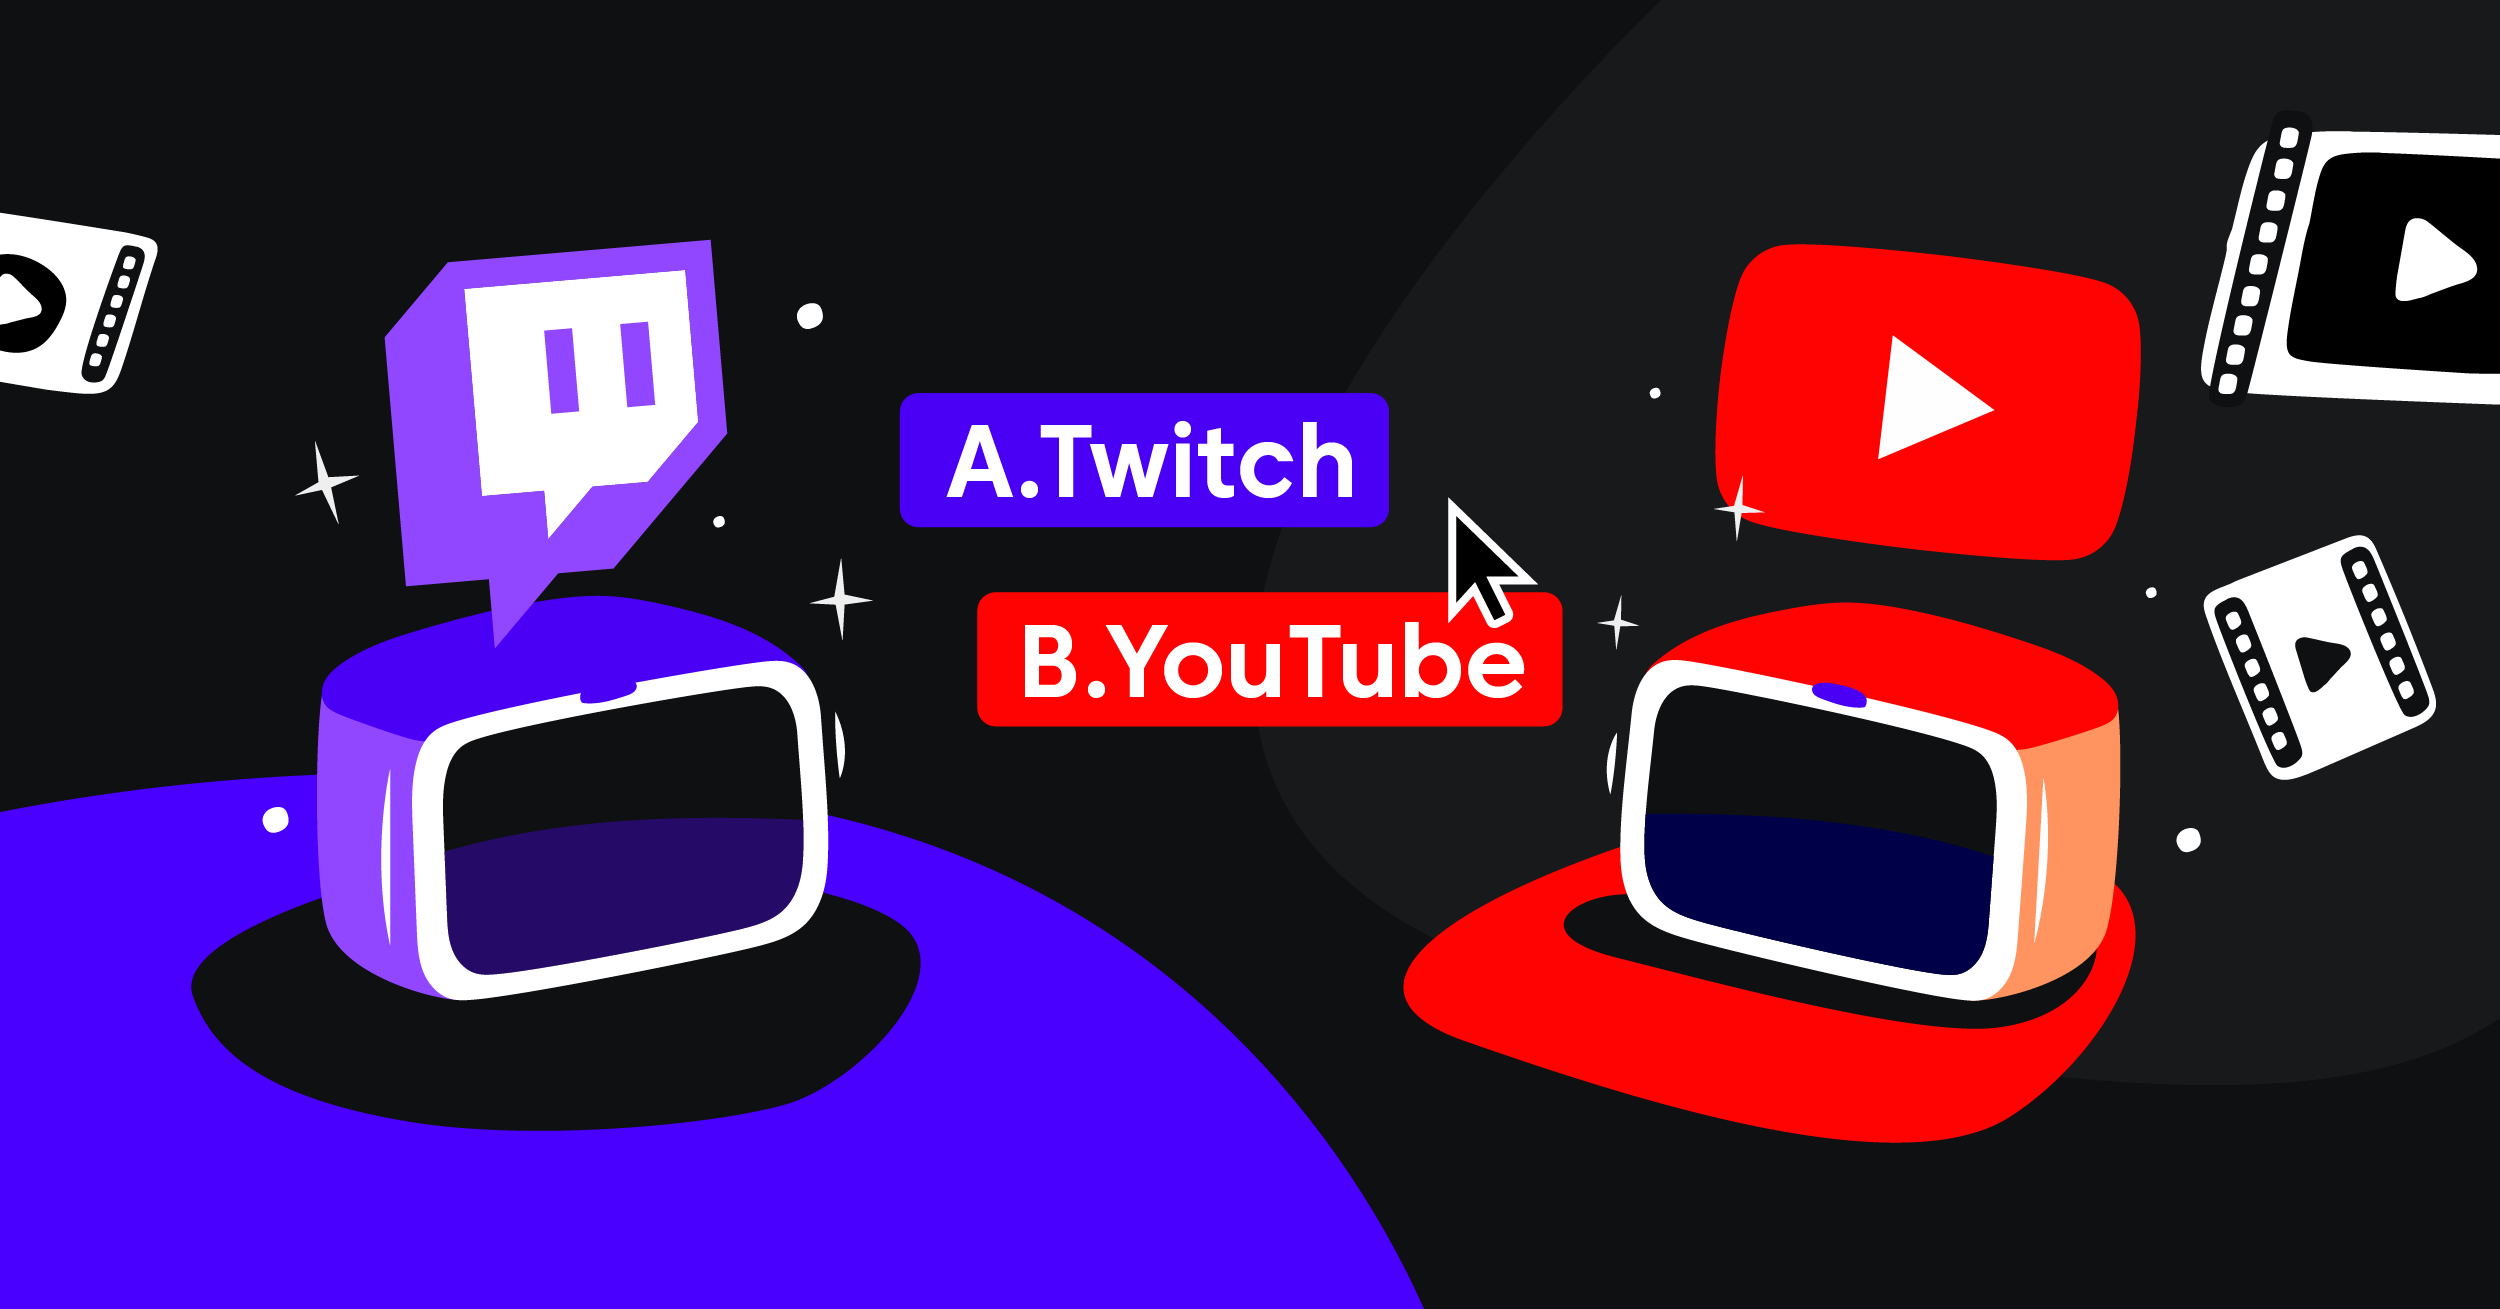 Twitch vs YouTube: Where Should You Stream?